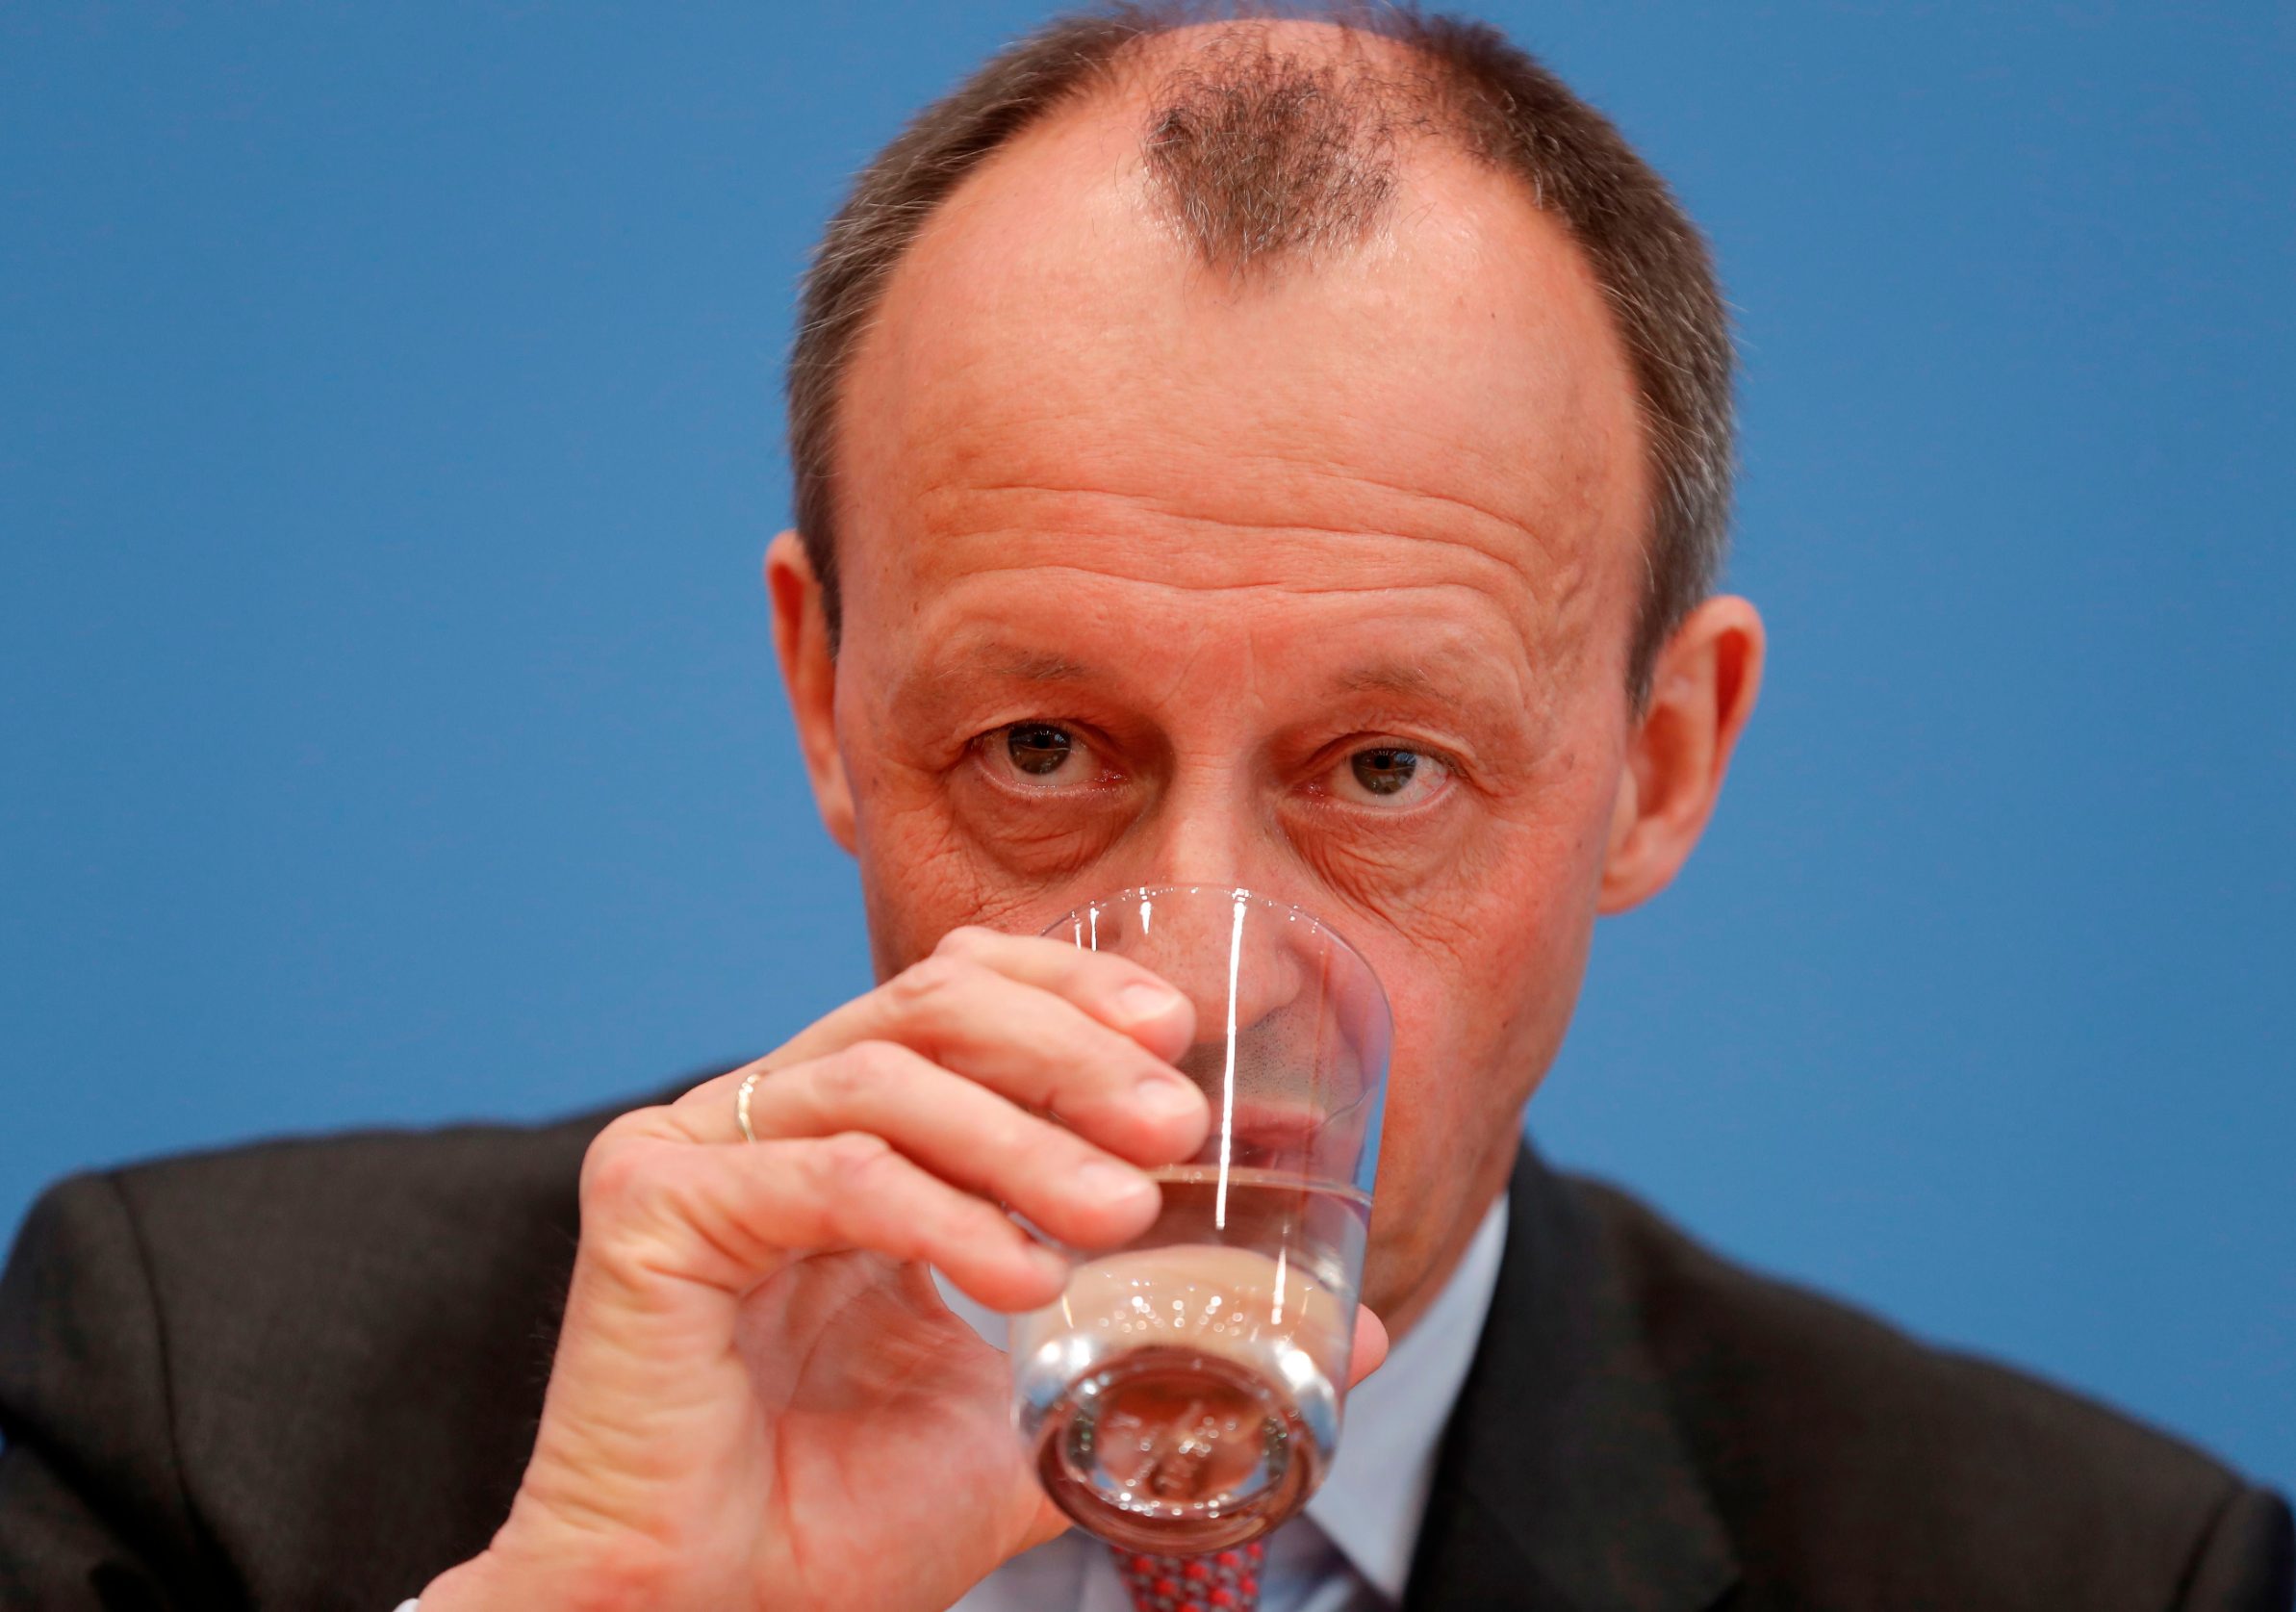 Christian Democratic Union (CDU) politician Friedrich Merz drinks water as he gives a press conference on February 25, 2020 in Berlin, to comment on his candidacy as CDU leaders. (Photo by Odd ANDERSEN / AFP)